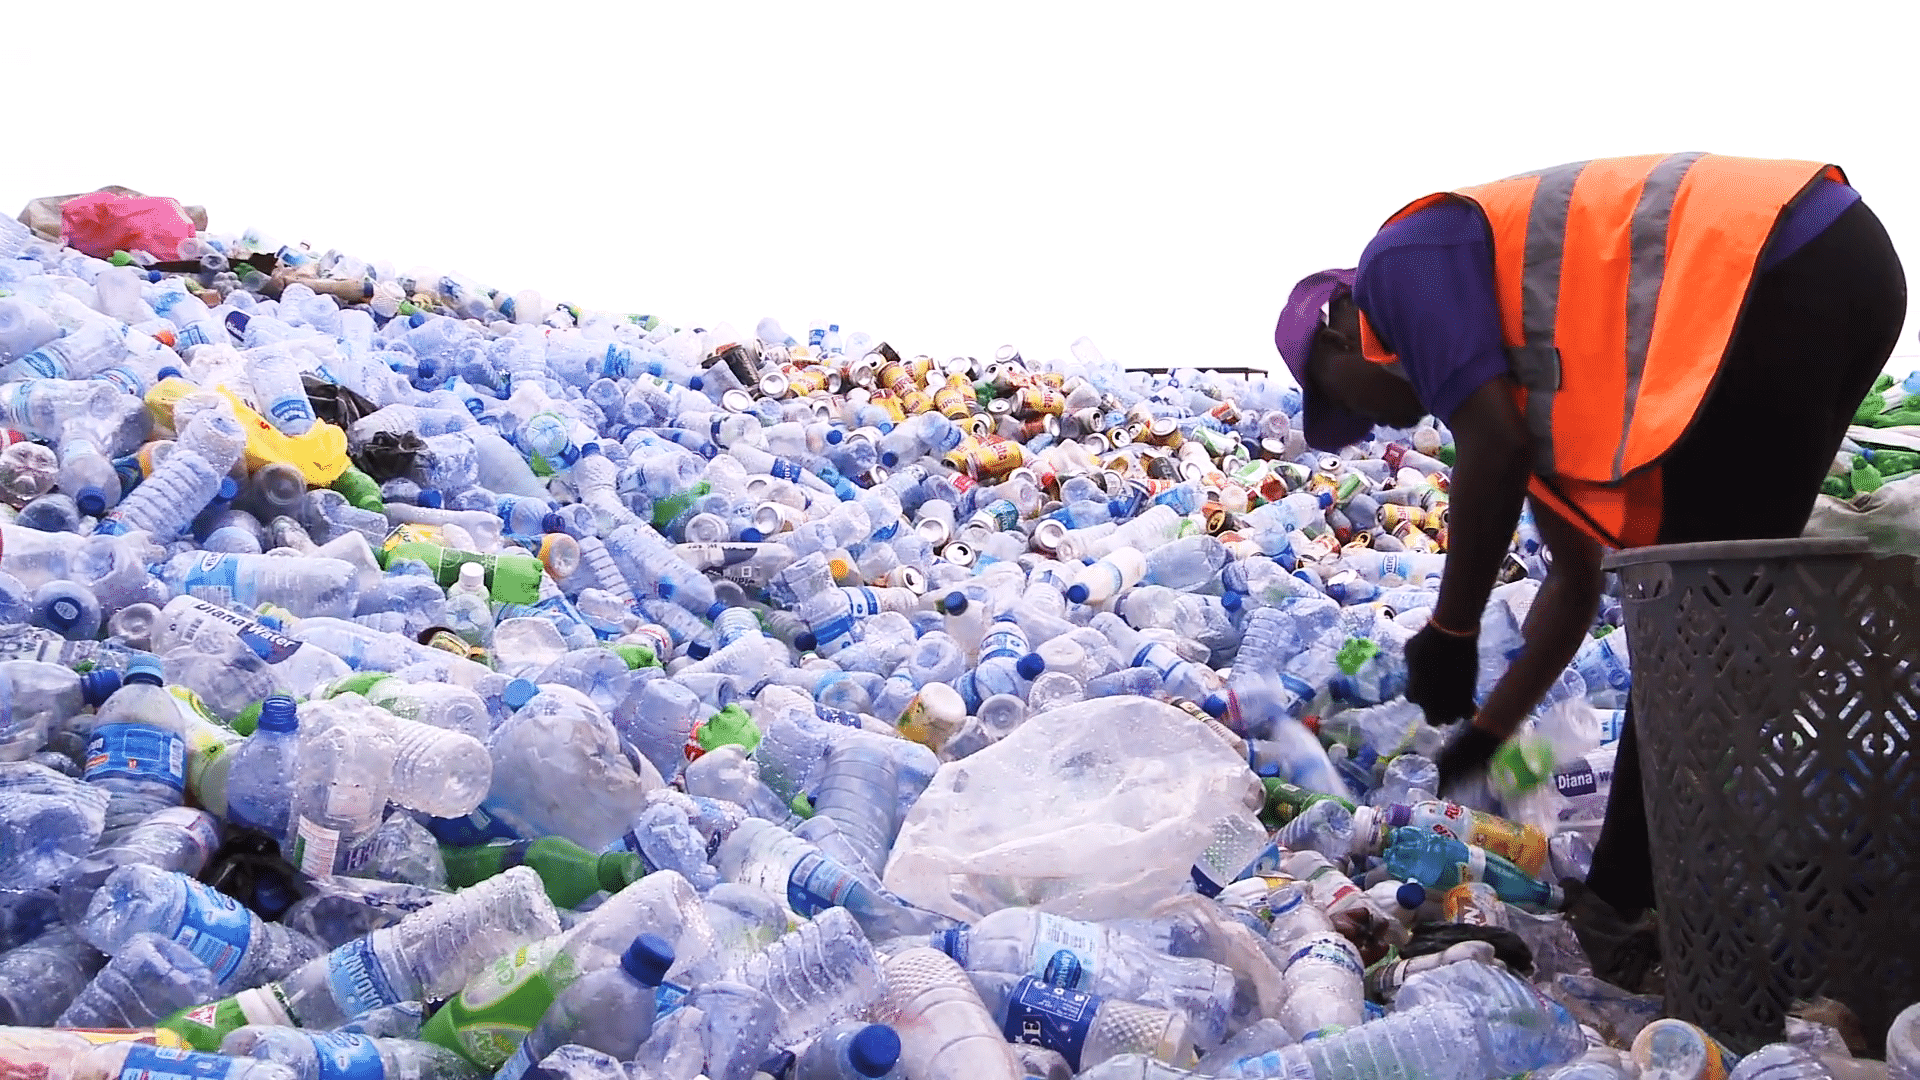 Recycling In Africa Employee Sorts Empty Bottles And Containers At Recycling Center 1080P Hd Lagos Nigeria Circa May 2014 4Kqbg8 A F0000 مجلة نقطة العلمية